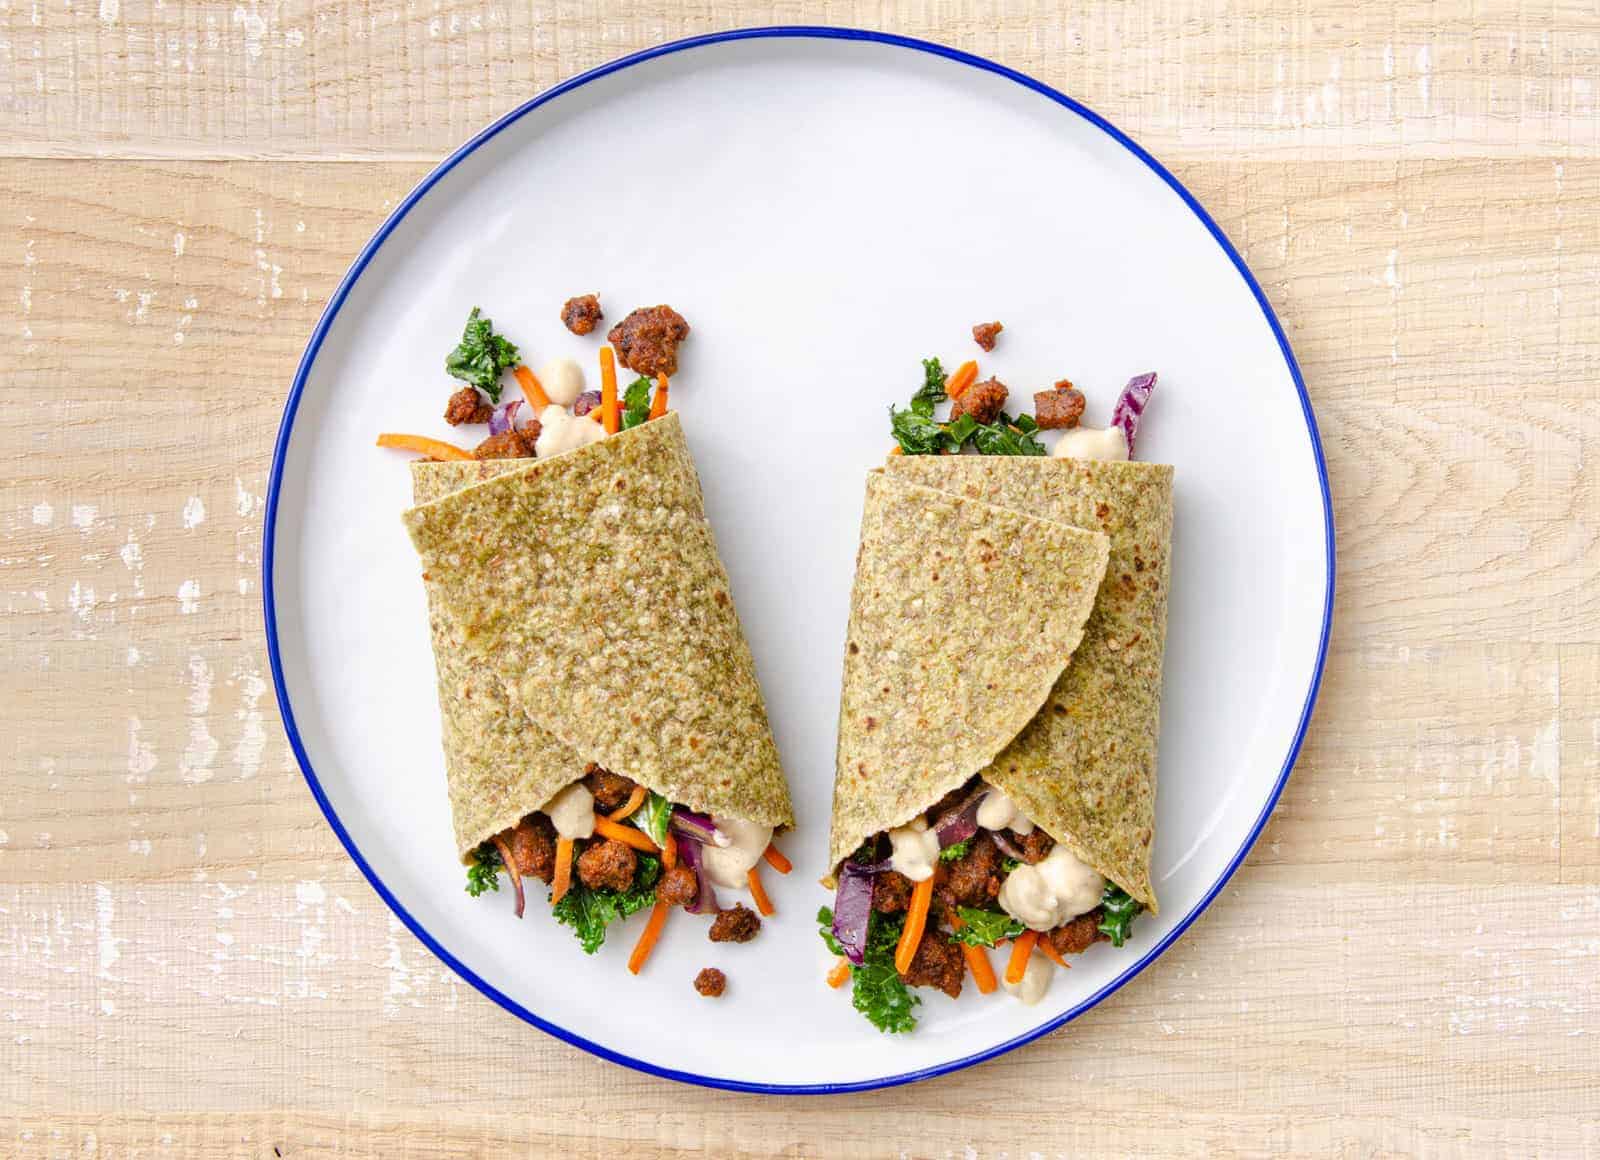 A Hungryroot vegan wrap spilling out ingredients onto a white plate sat on a wood table.